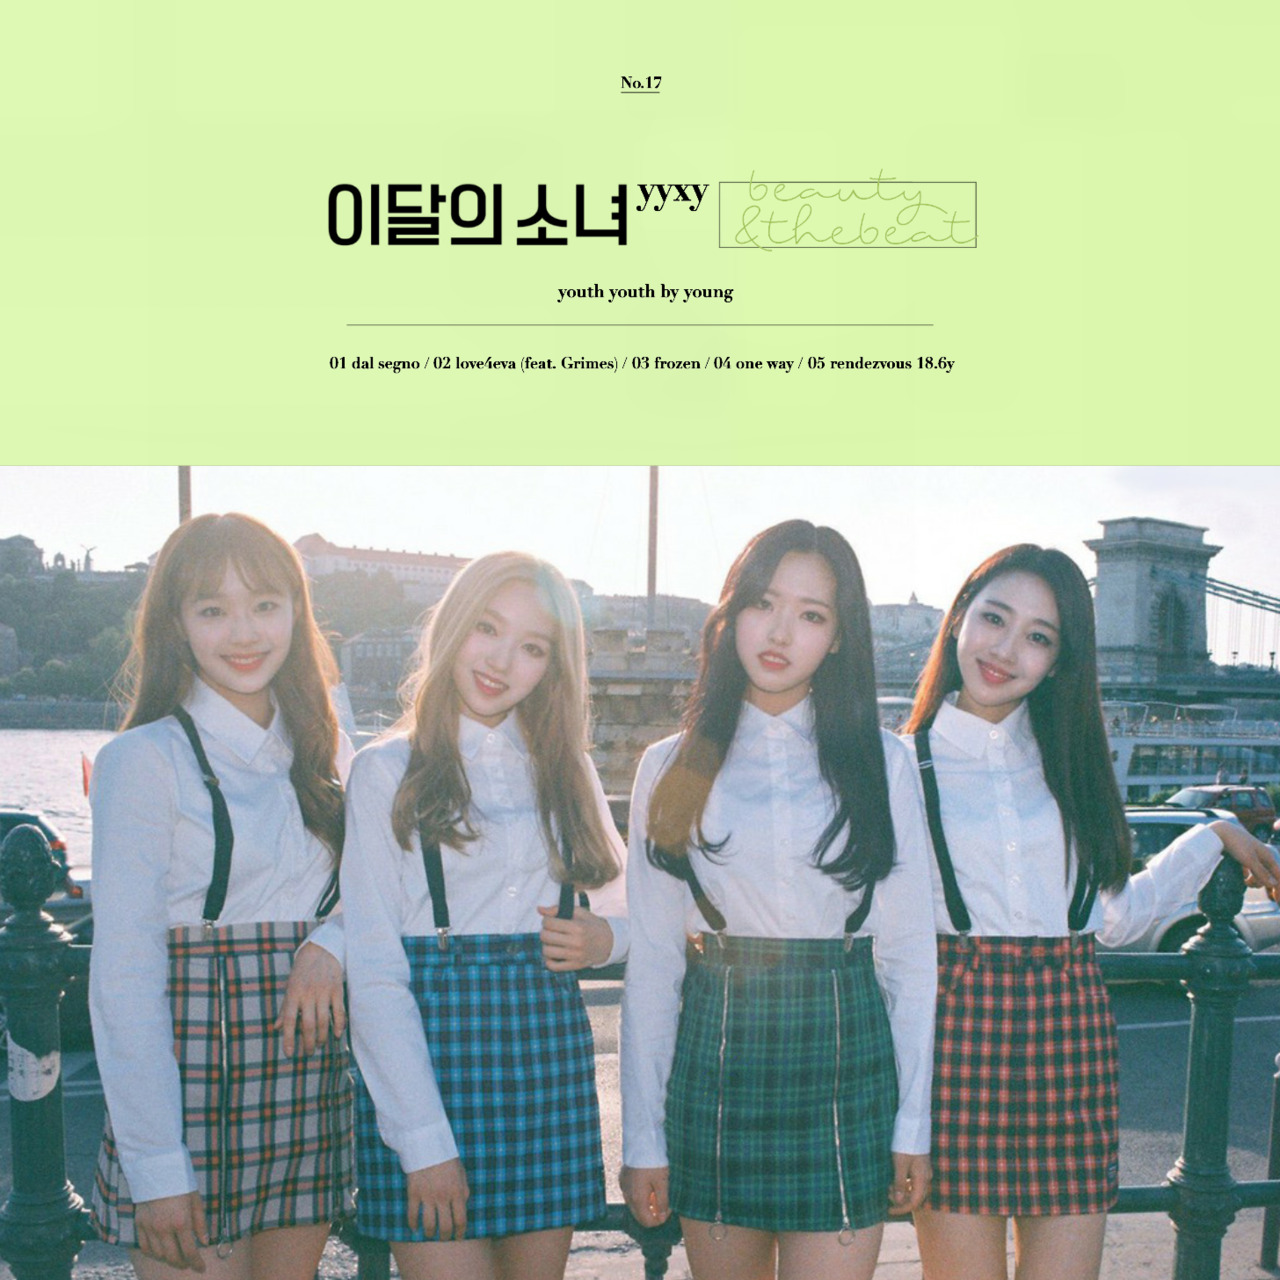 LOONA / yyxy featuring Grimes — love4eva (feat. Grimes) cover artwork